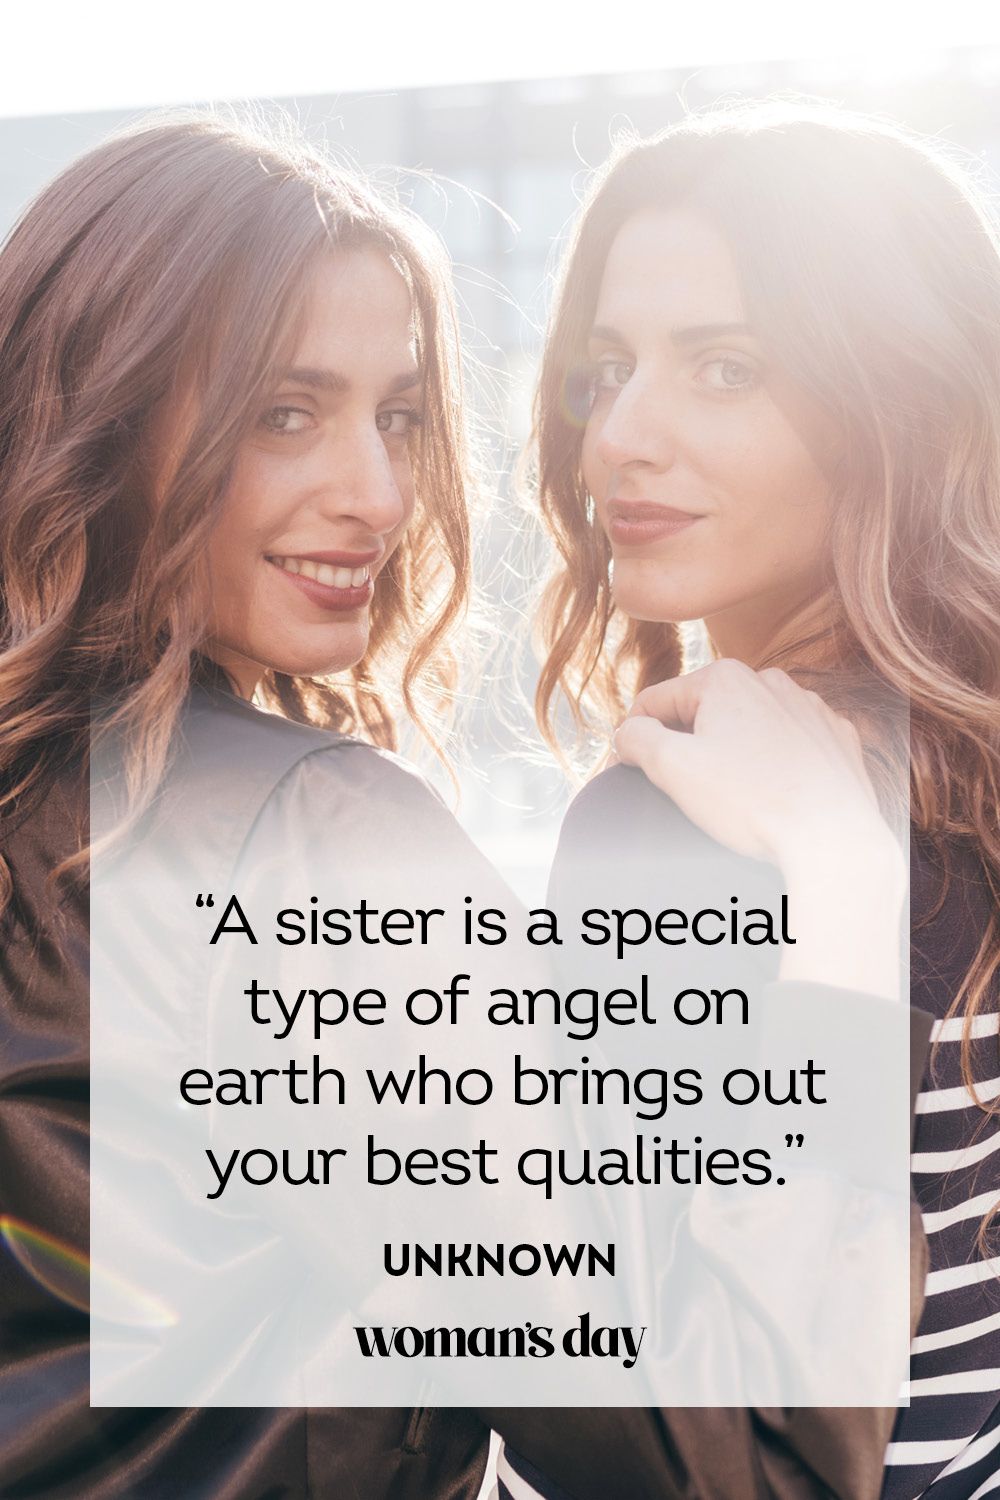 cute best friend quotes for teenage girls